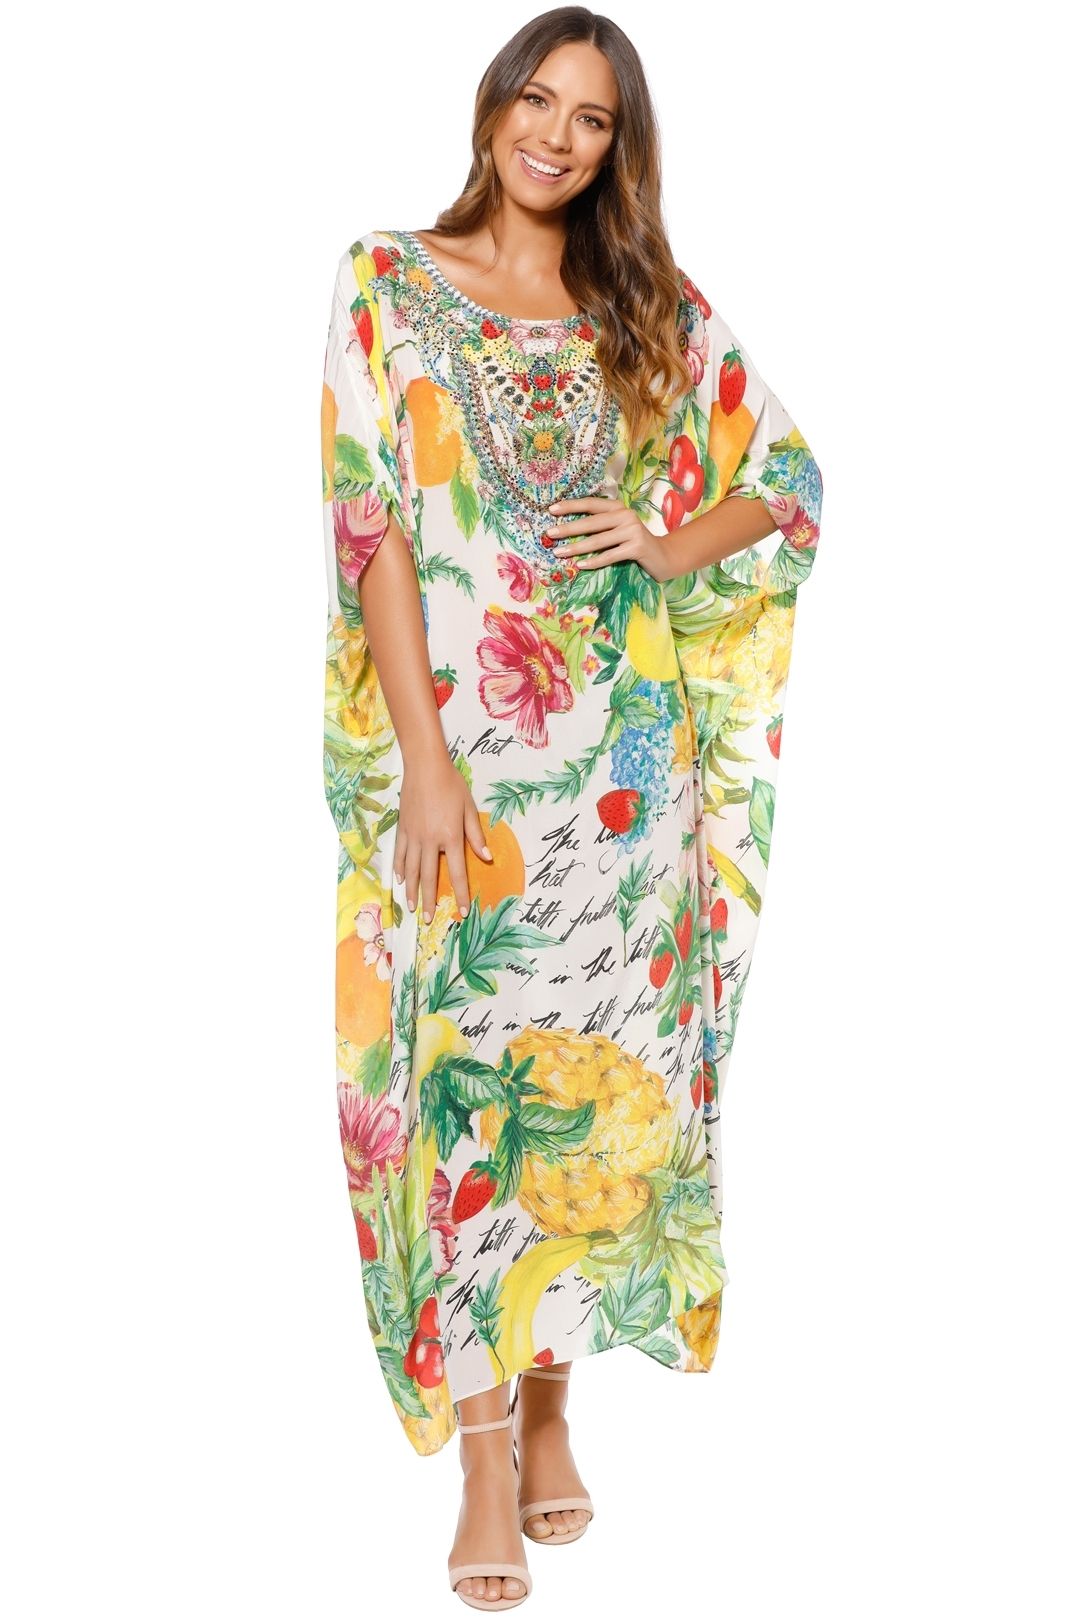 There's No Place Like Rio Kaftan by Camilla for Hire